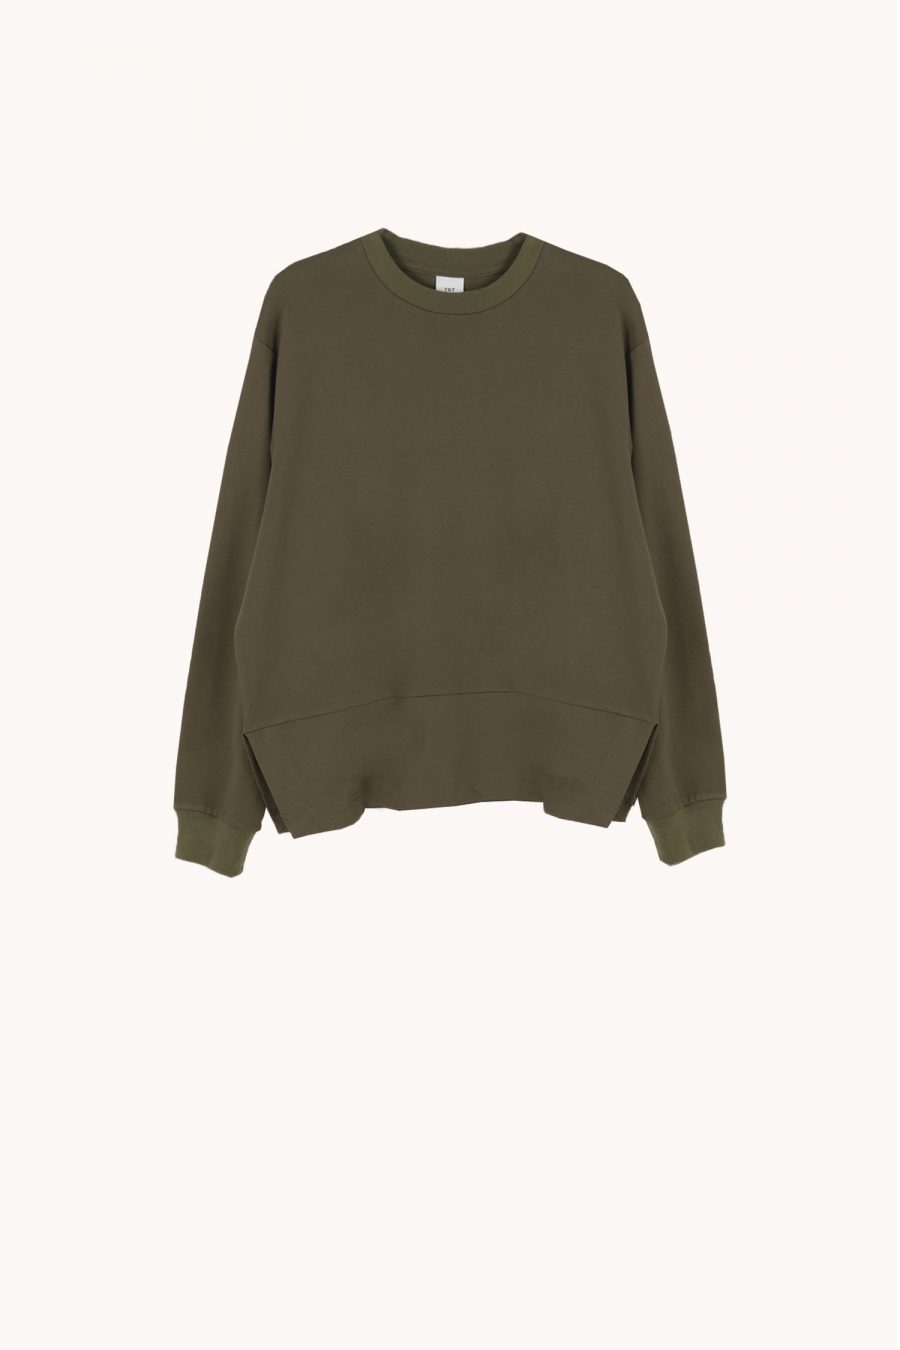 MTL900016W Army Green Sweater Front